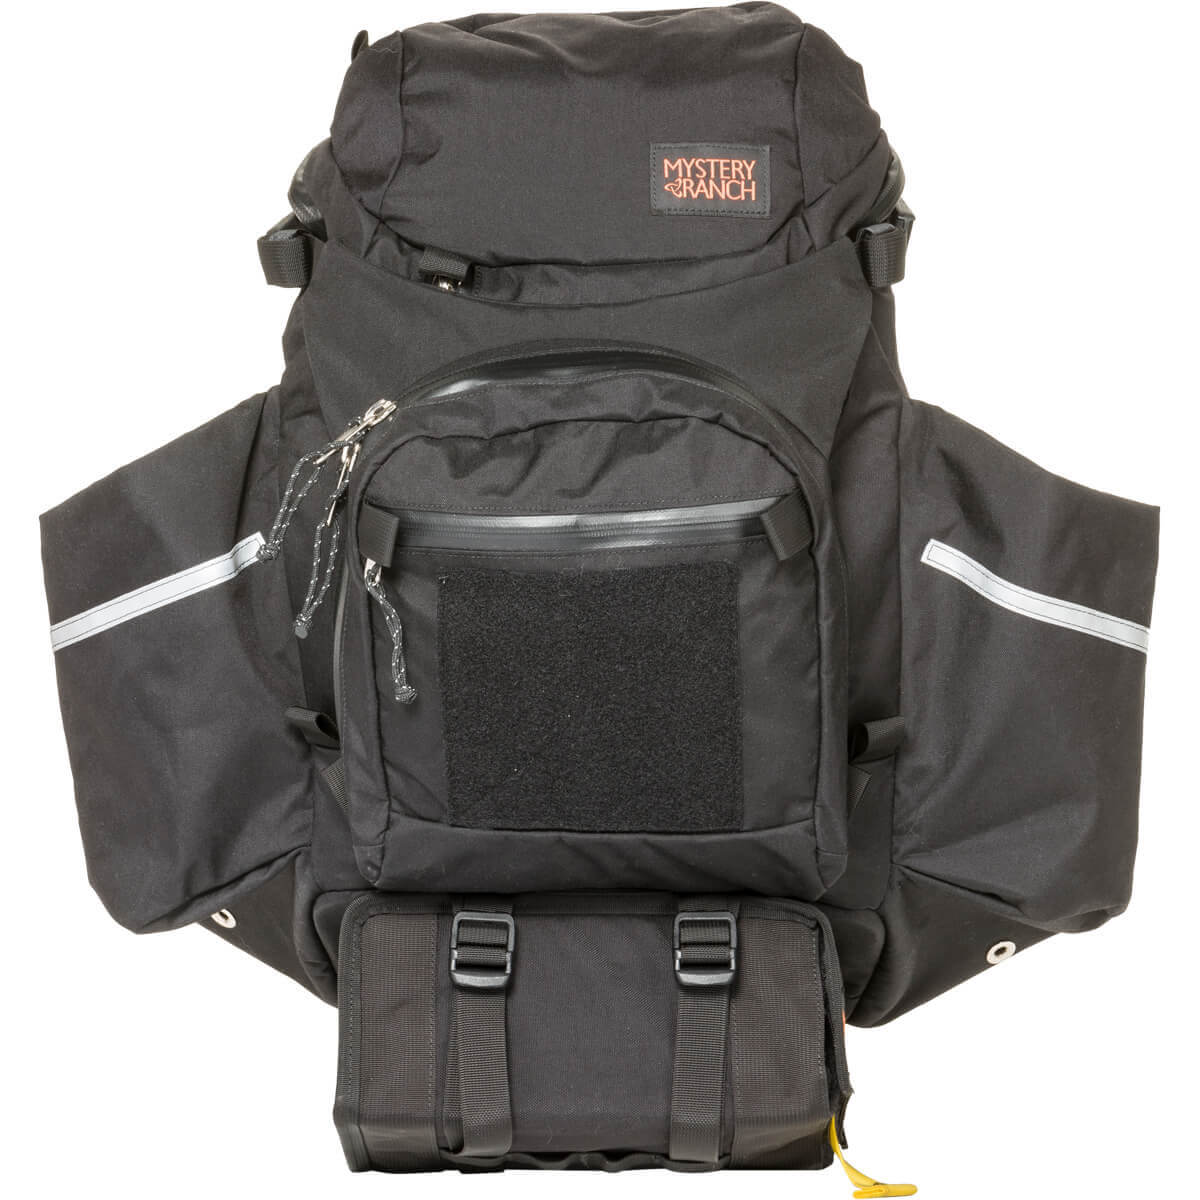 the Mystery Ranch FEMP Wildland Pack was designed to allow quick access to all of your medical equipment, with enough additional space for your personal gear and admin goodies.